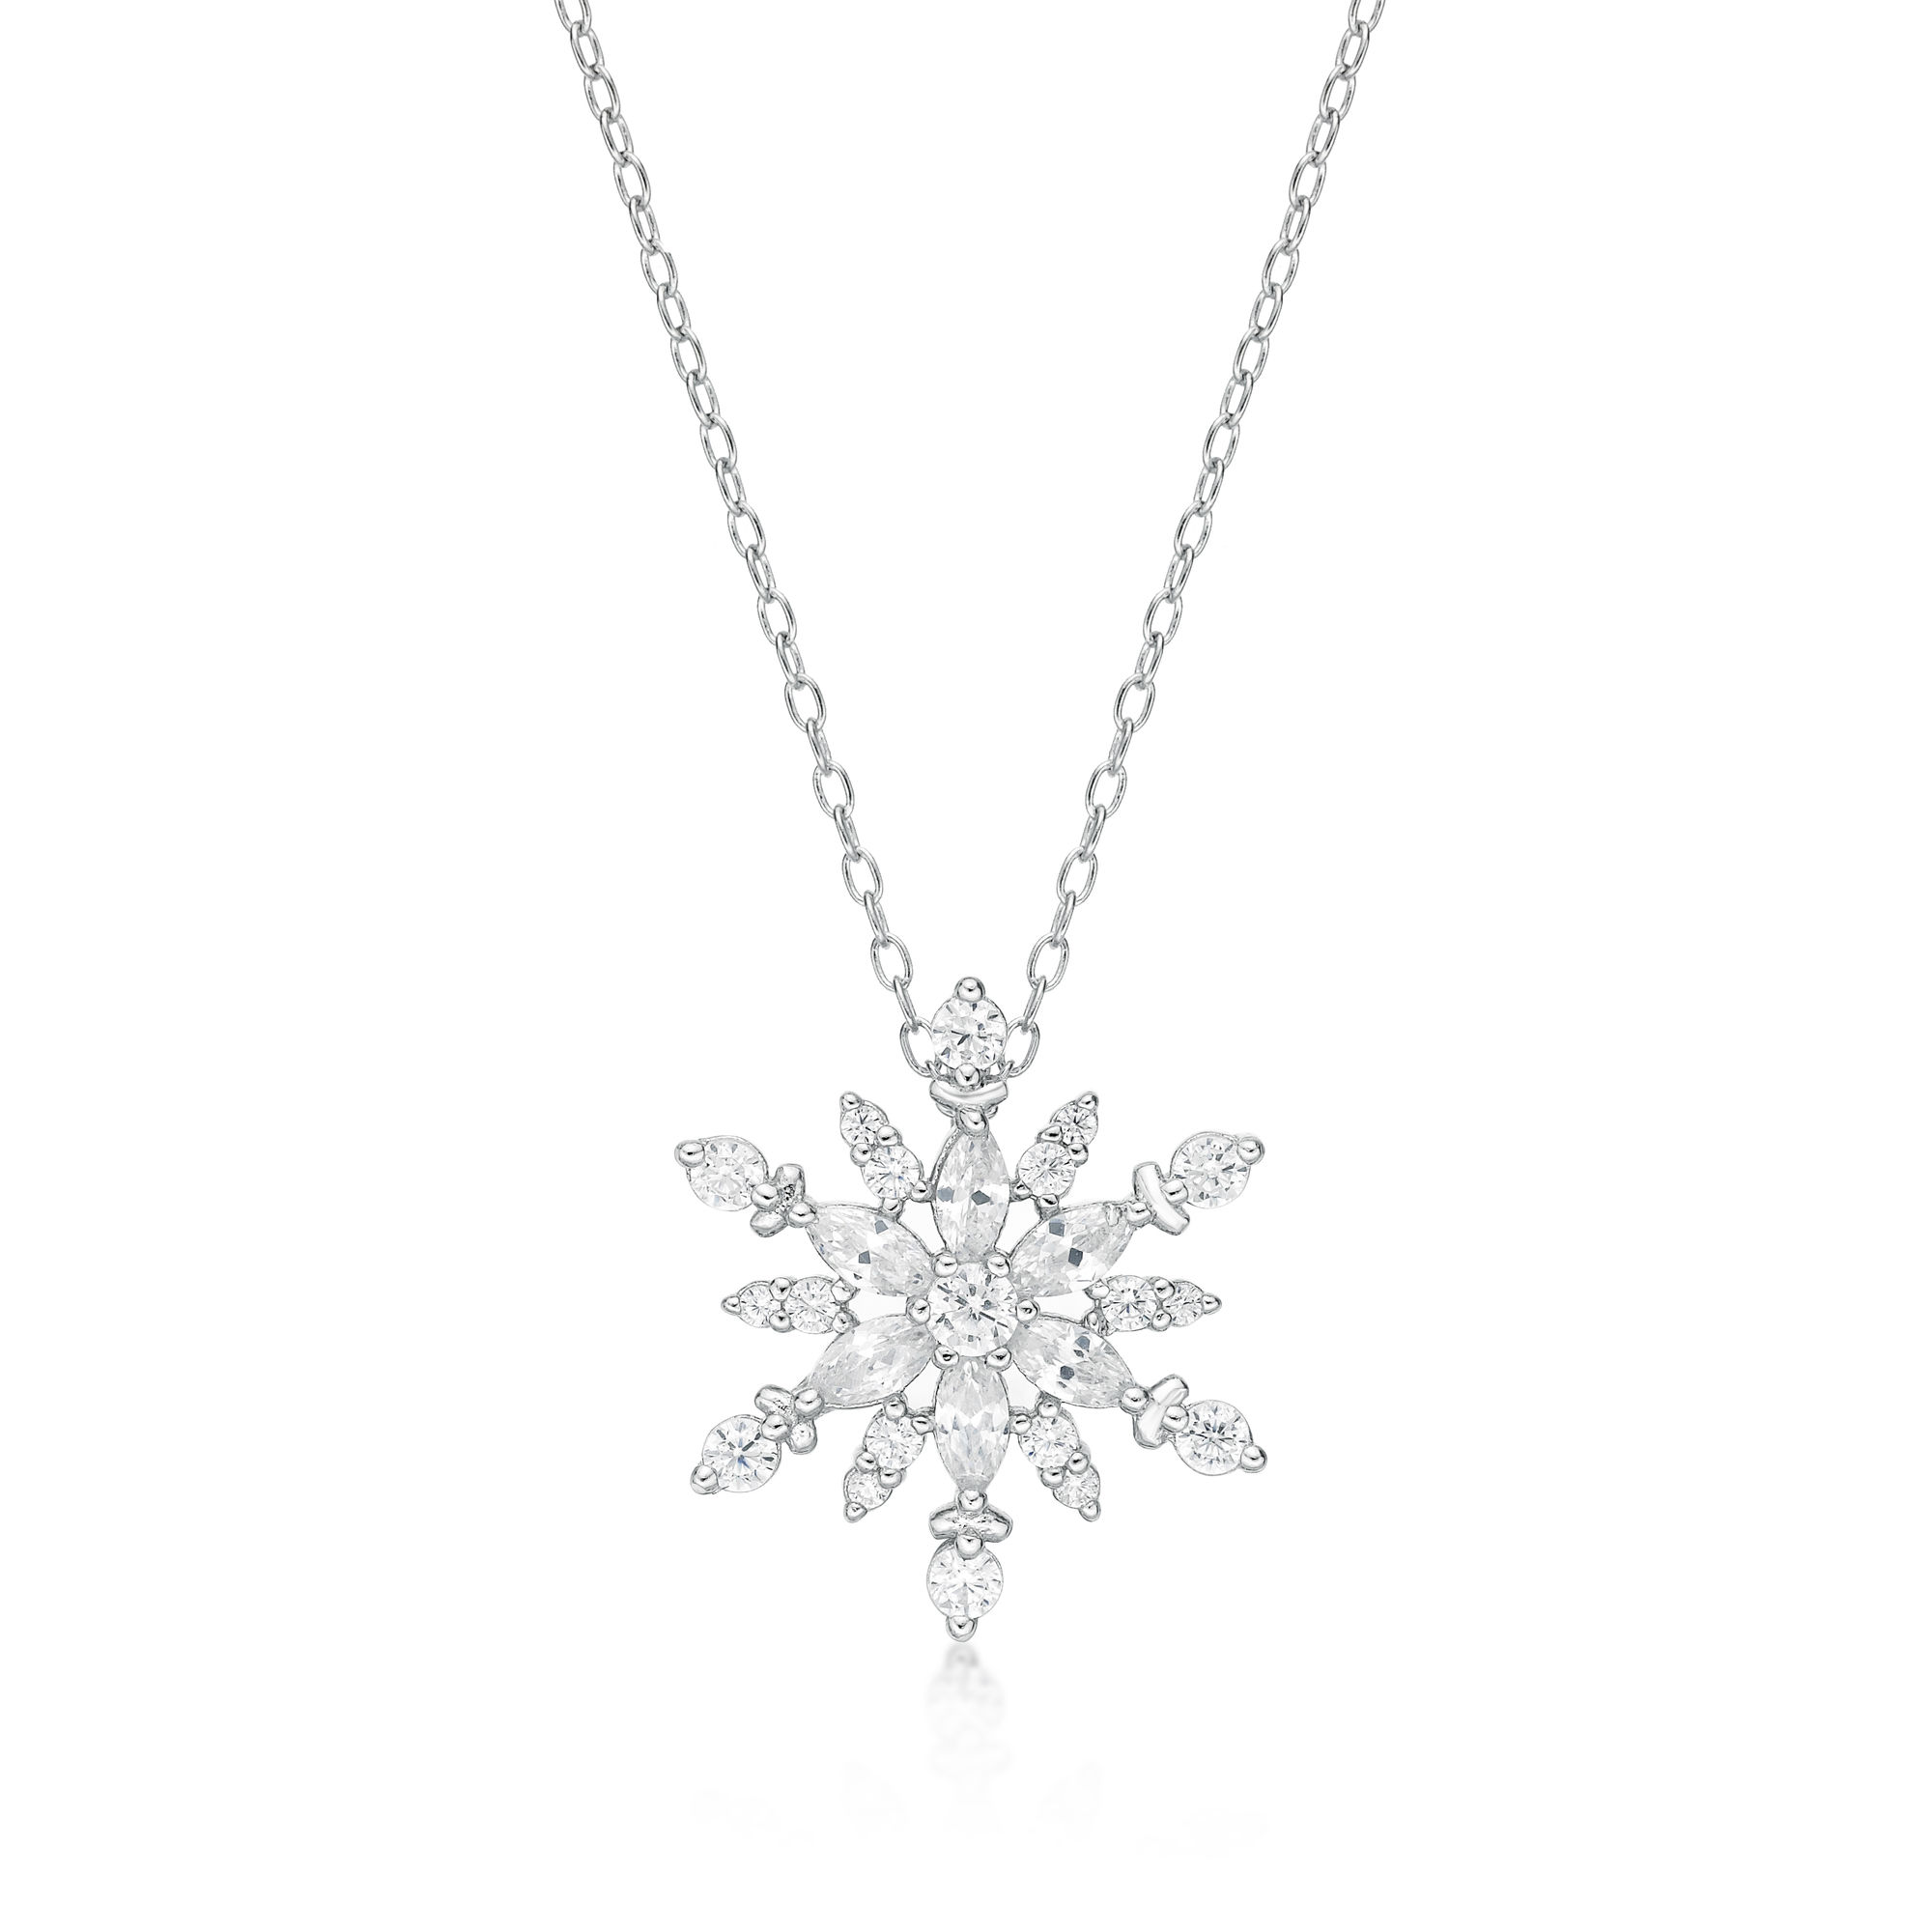 Women's Flurry Snowflake Pendant with Lobster Clasp, Sterling Silver, Cubic Zirconia, 18 Inch Adjustable Chain | Lavari Jewelers